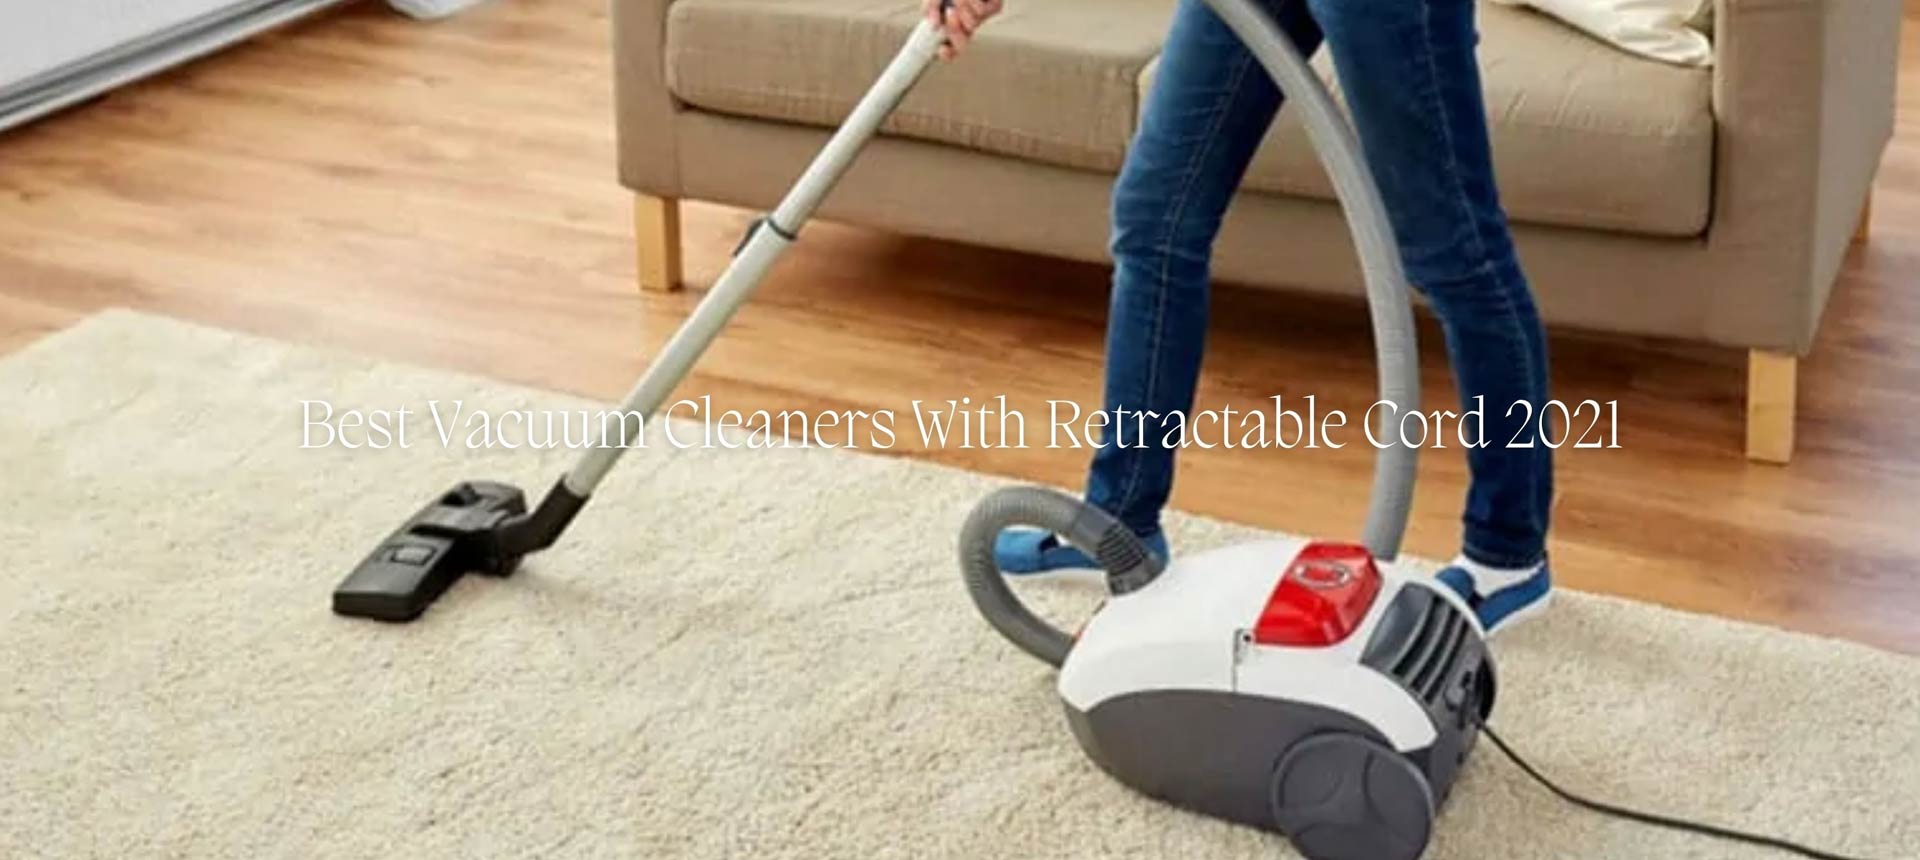 Best Vacuum Cleaners With Retractable Cord 2021